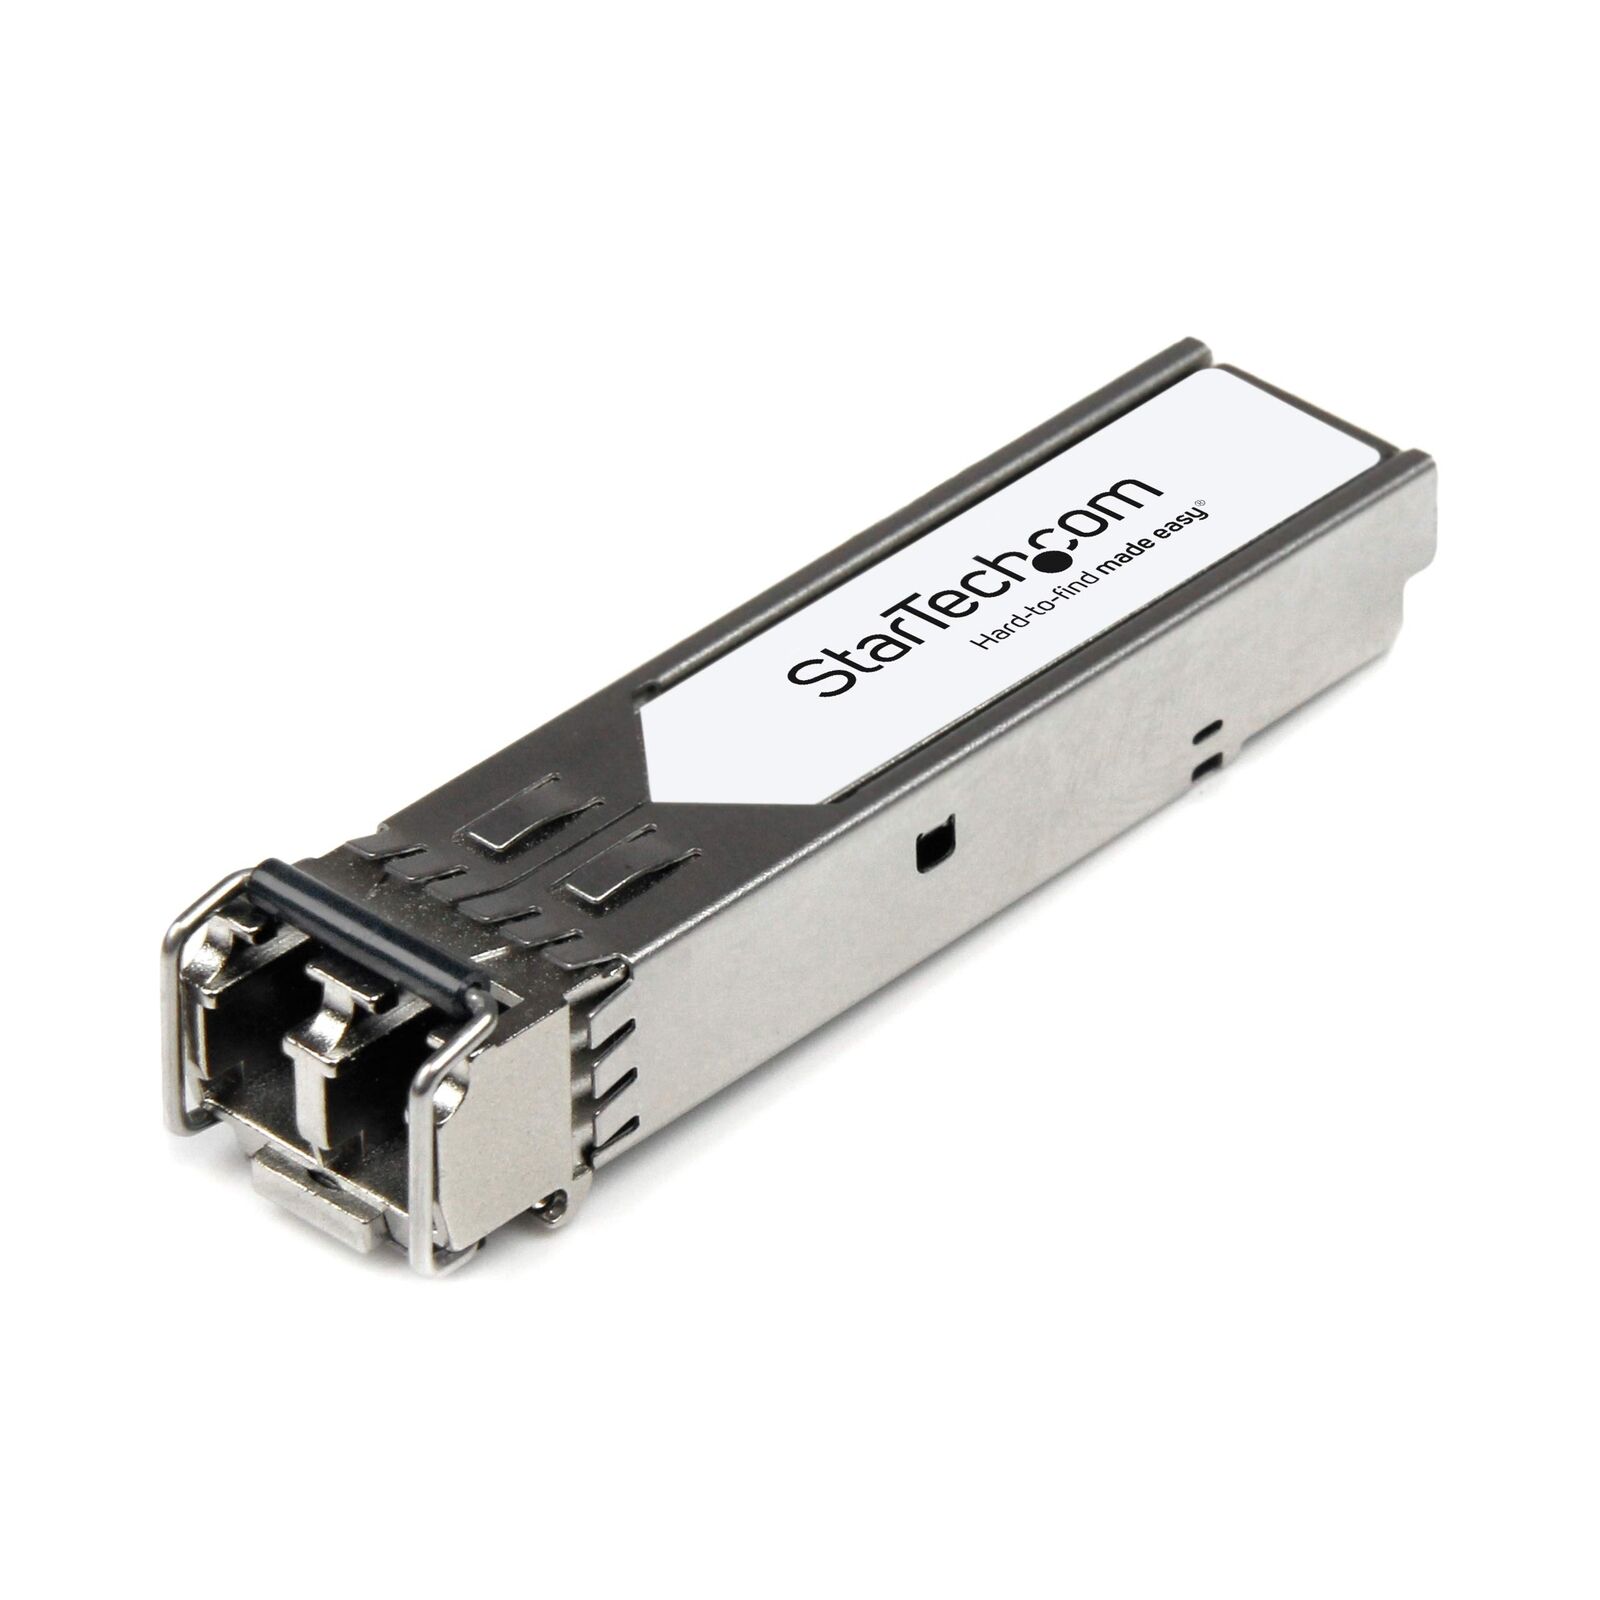 StarTech.com Extreme Networks 10052 Compatible SFP Module - 1000BASE-LX - 1GbE S